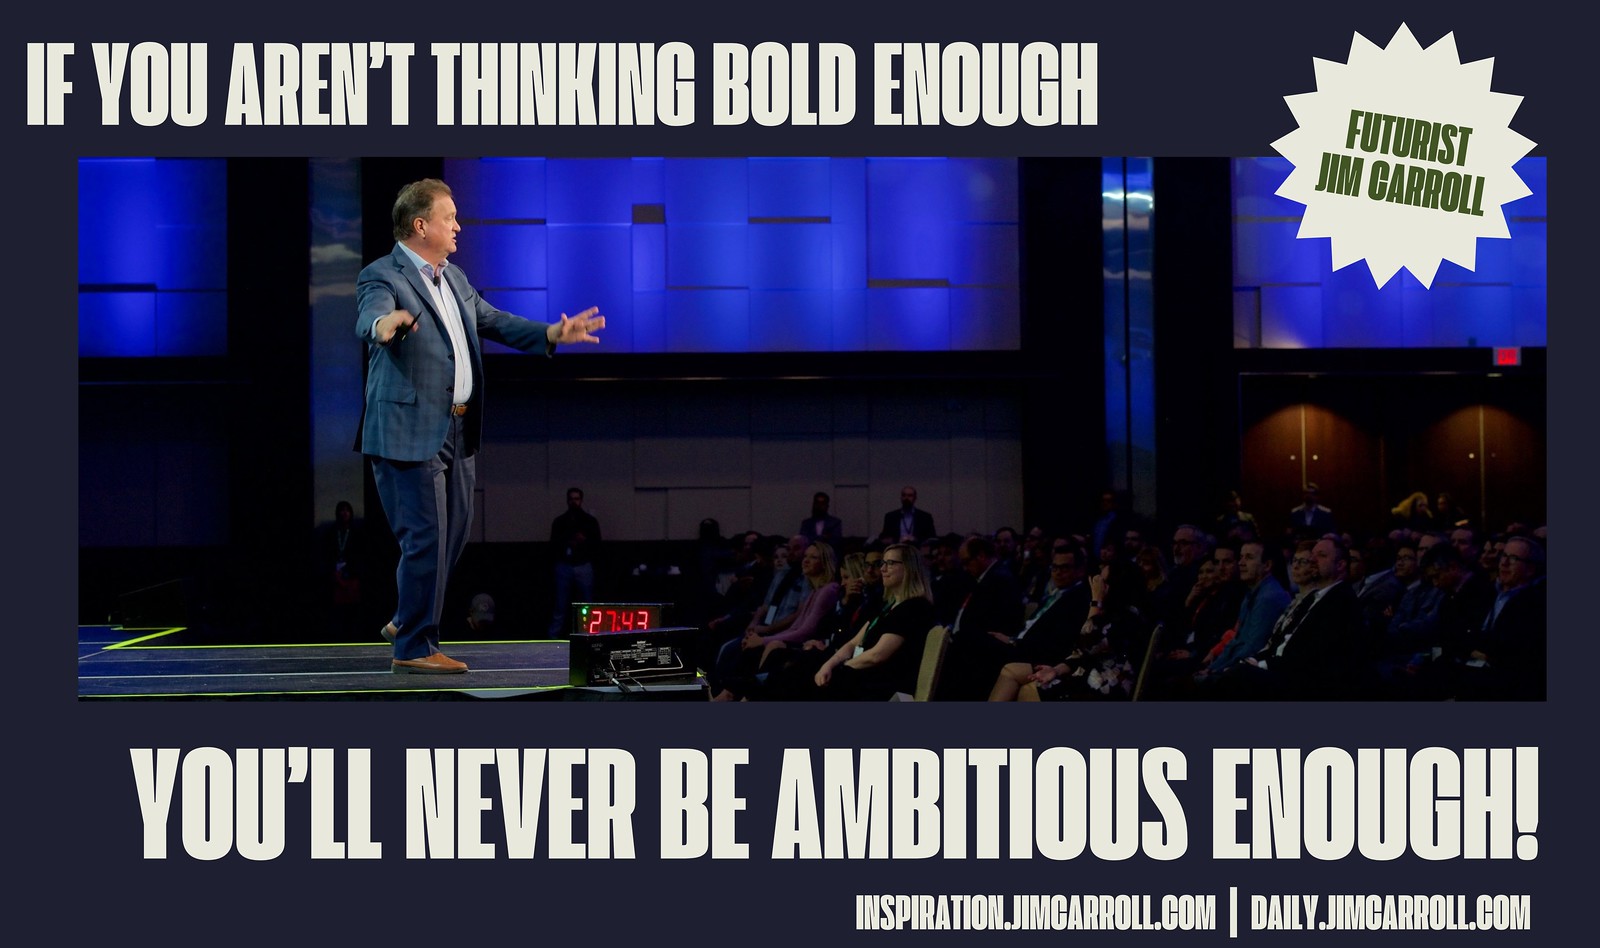 "If you aren't thinking bold enough you'll never be ambitious enough!" - Futurist Jim Carroll